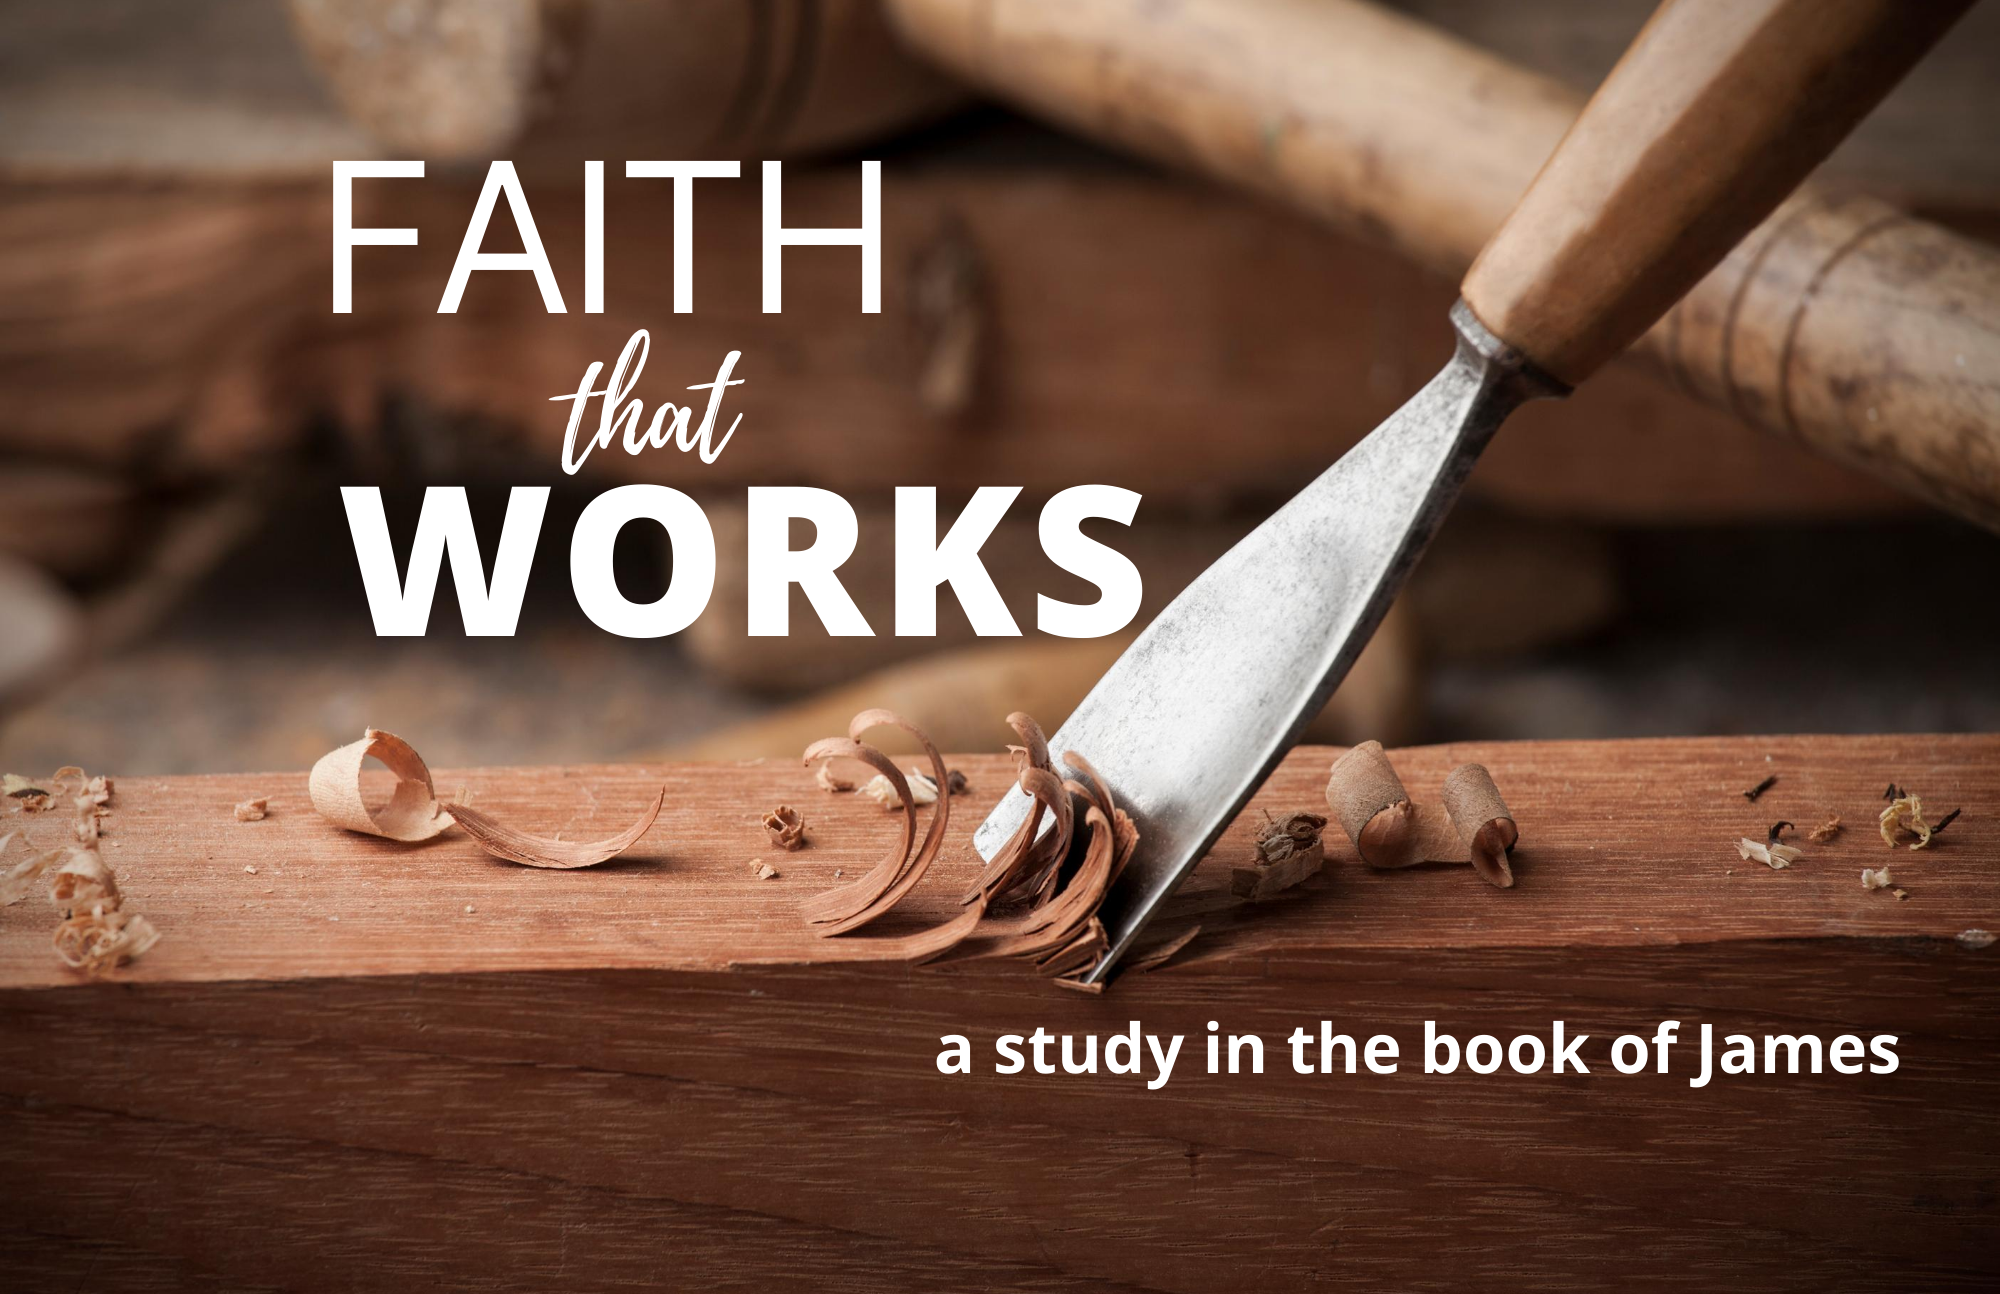 Faith that Works at the Right Time